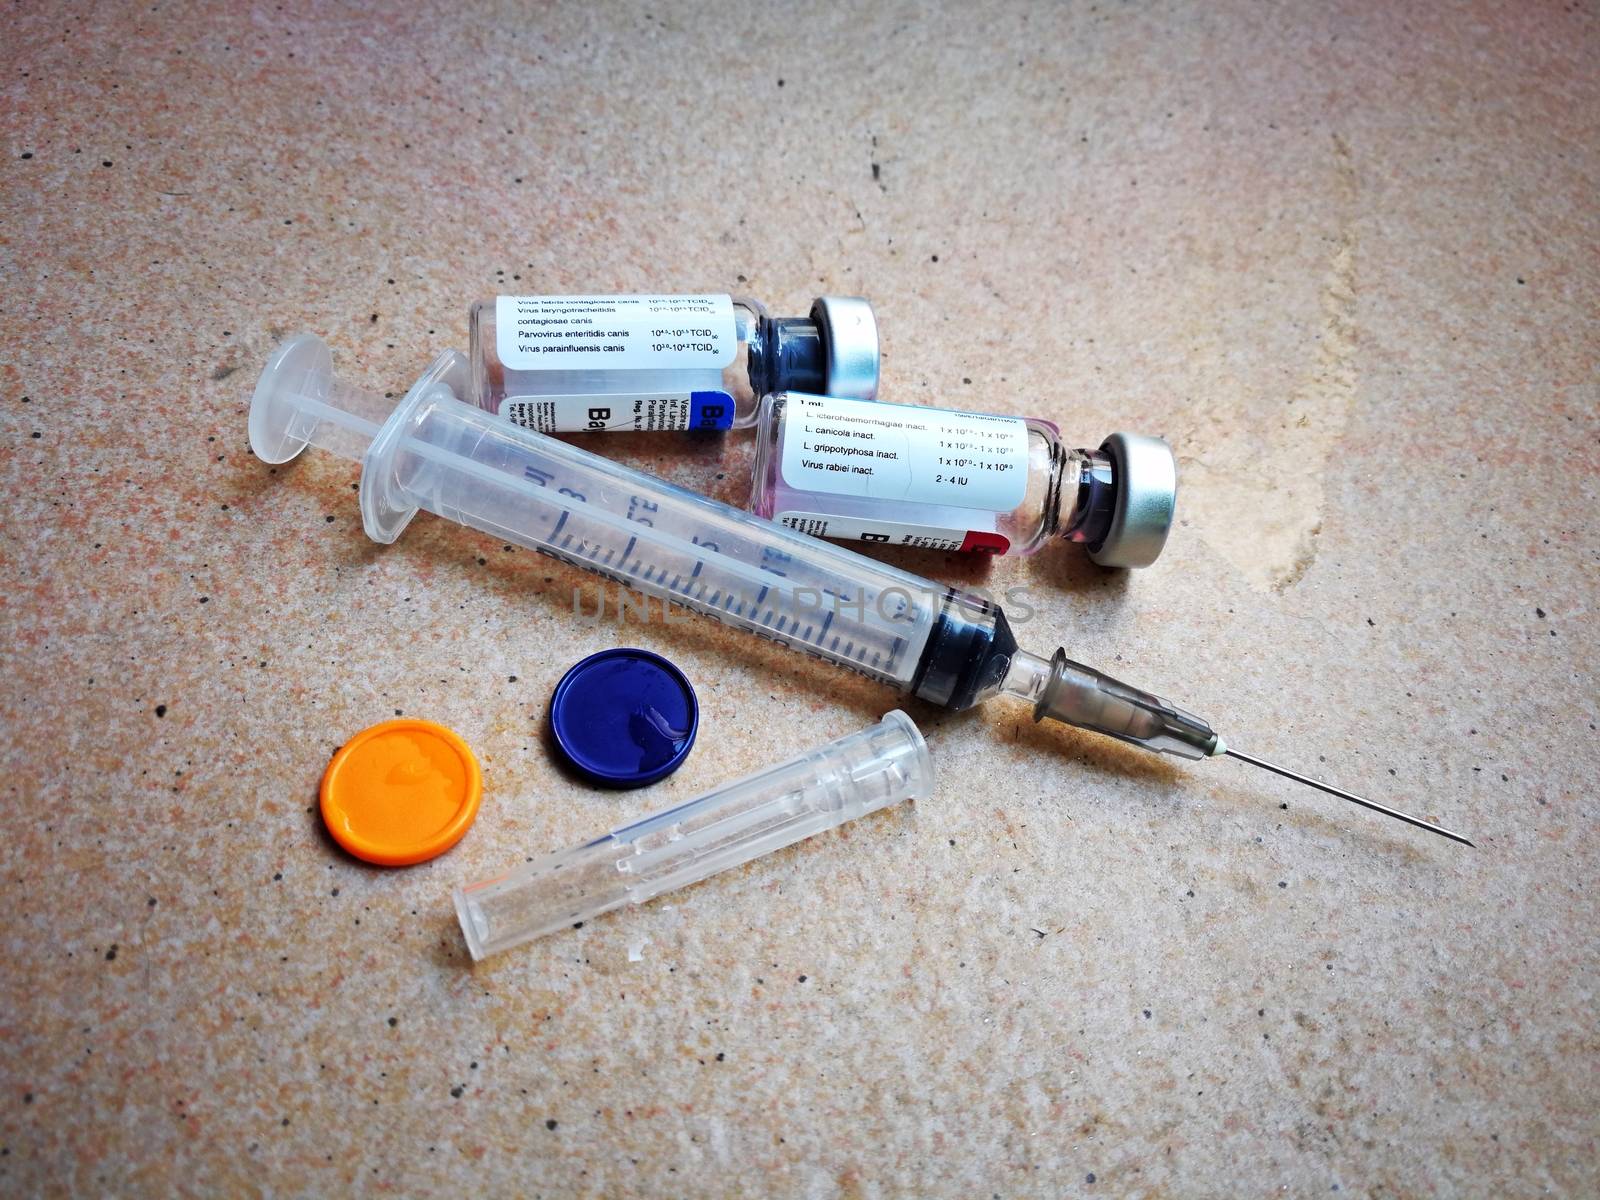 needles and vaccine for protect my dogs from  rabies, hydrophobia